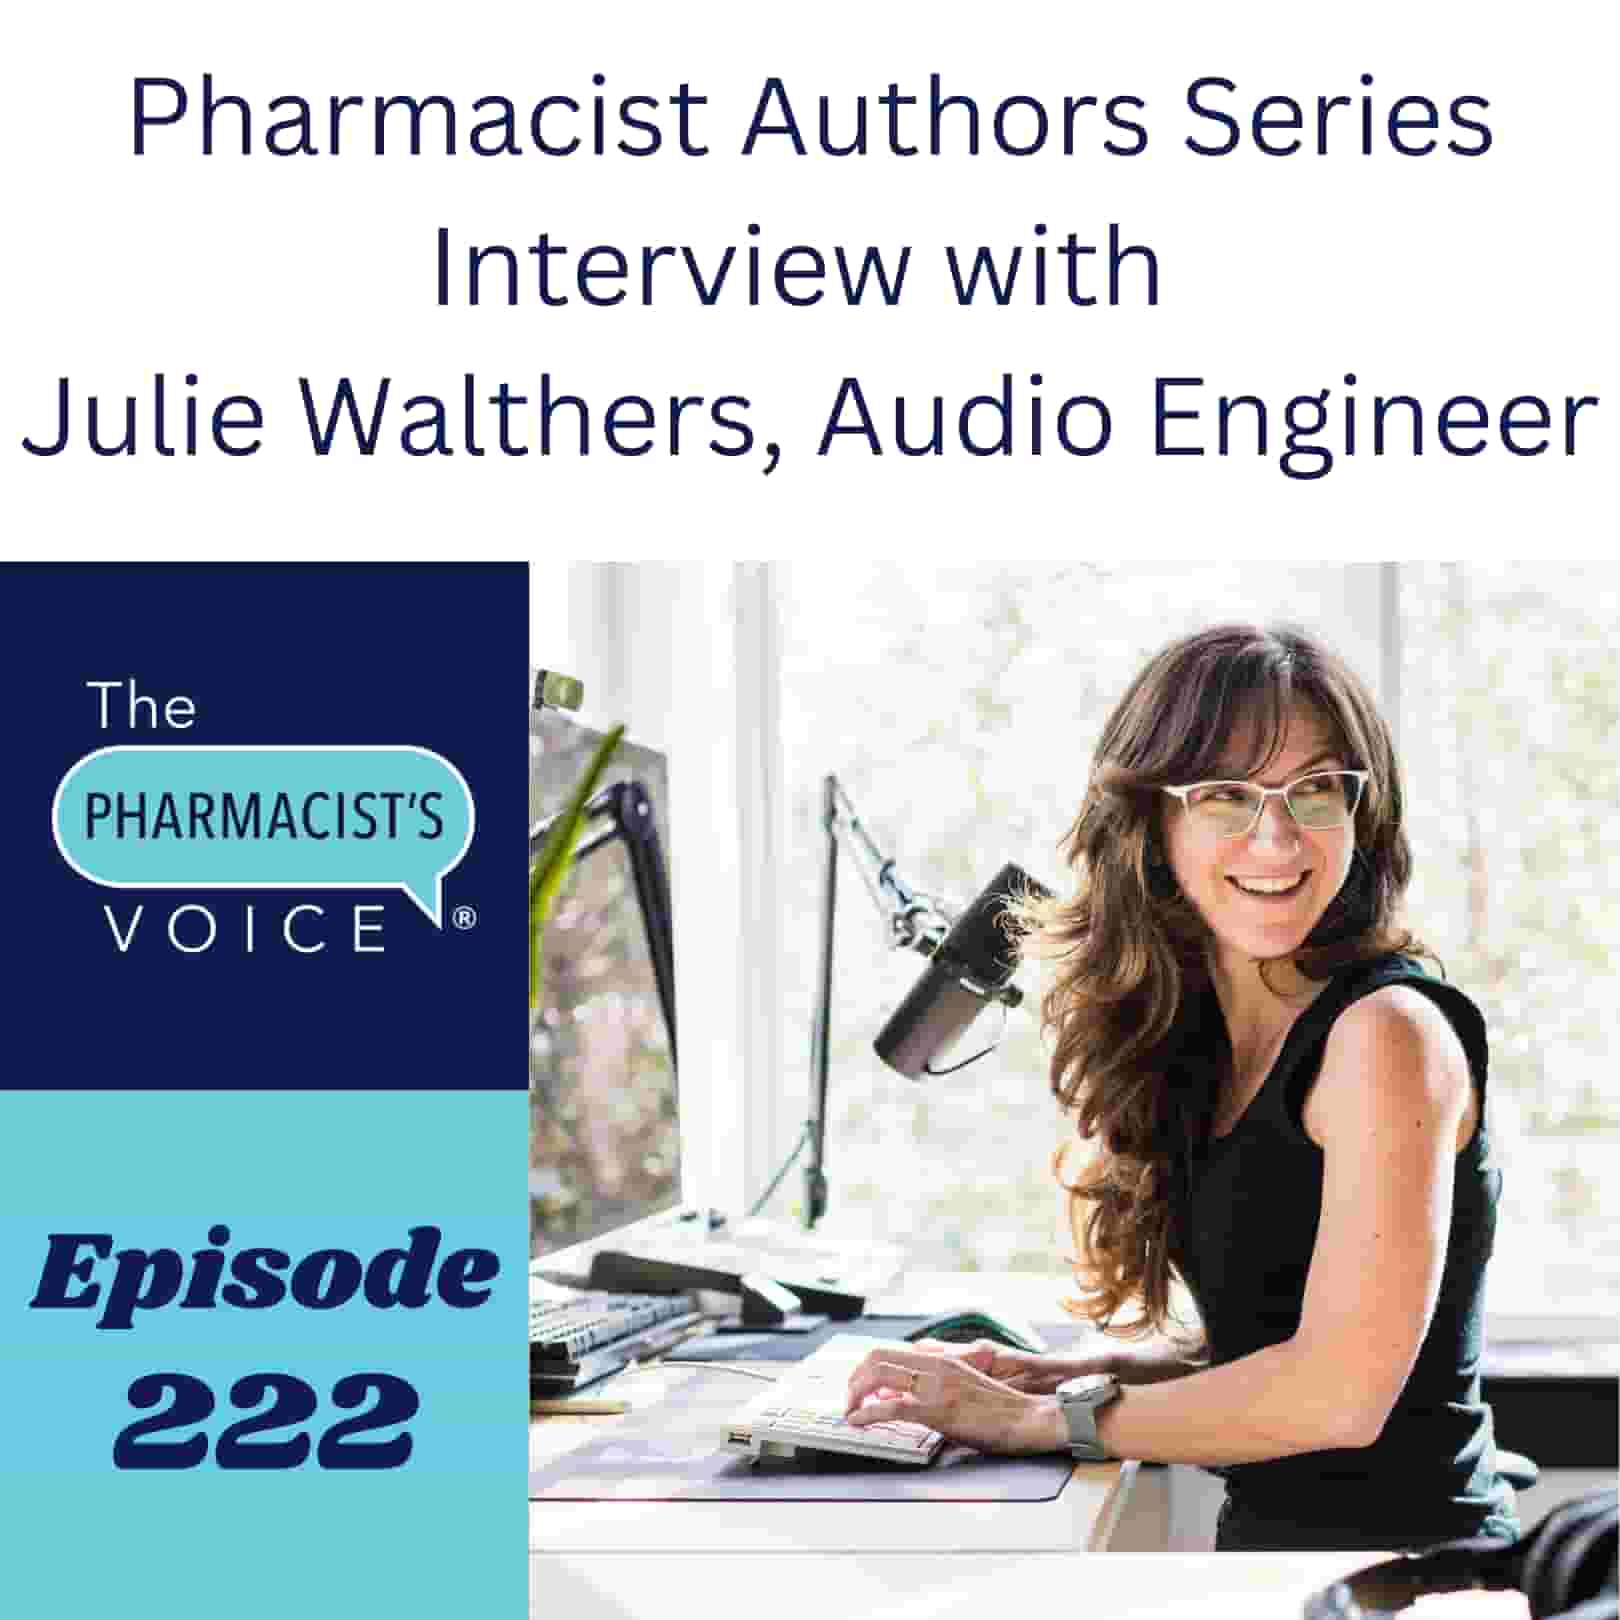 Pharmacist Authors Series Interview with Julie Walthers, Audio Engineer. The Pharmacist's Voice Podcast Episode 222